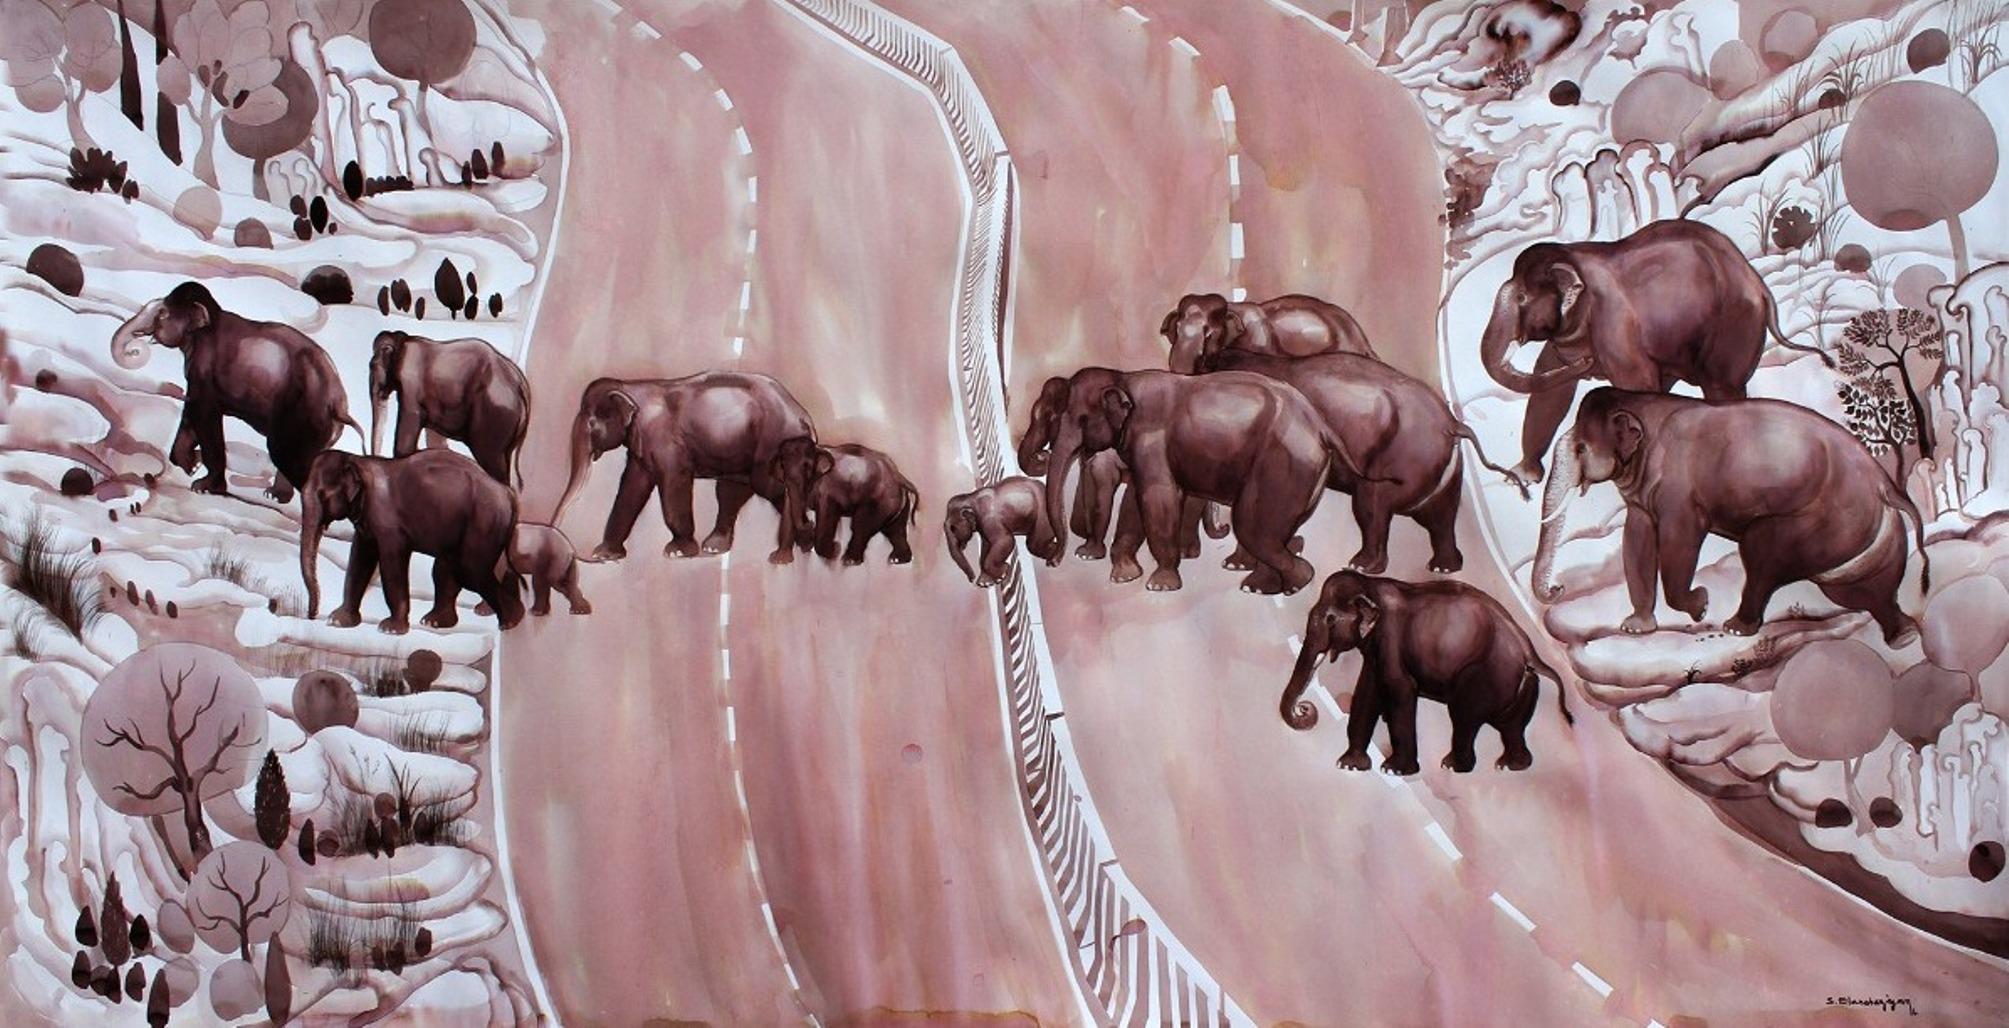 Migration, Group of Elephants, Ink on paper by Contemporary Artist "In Stock"